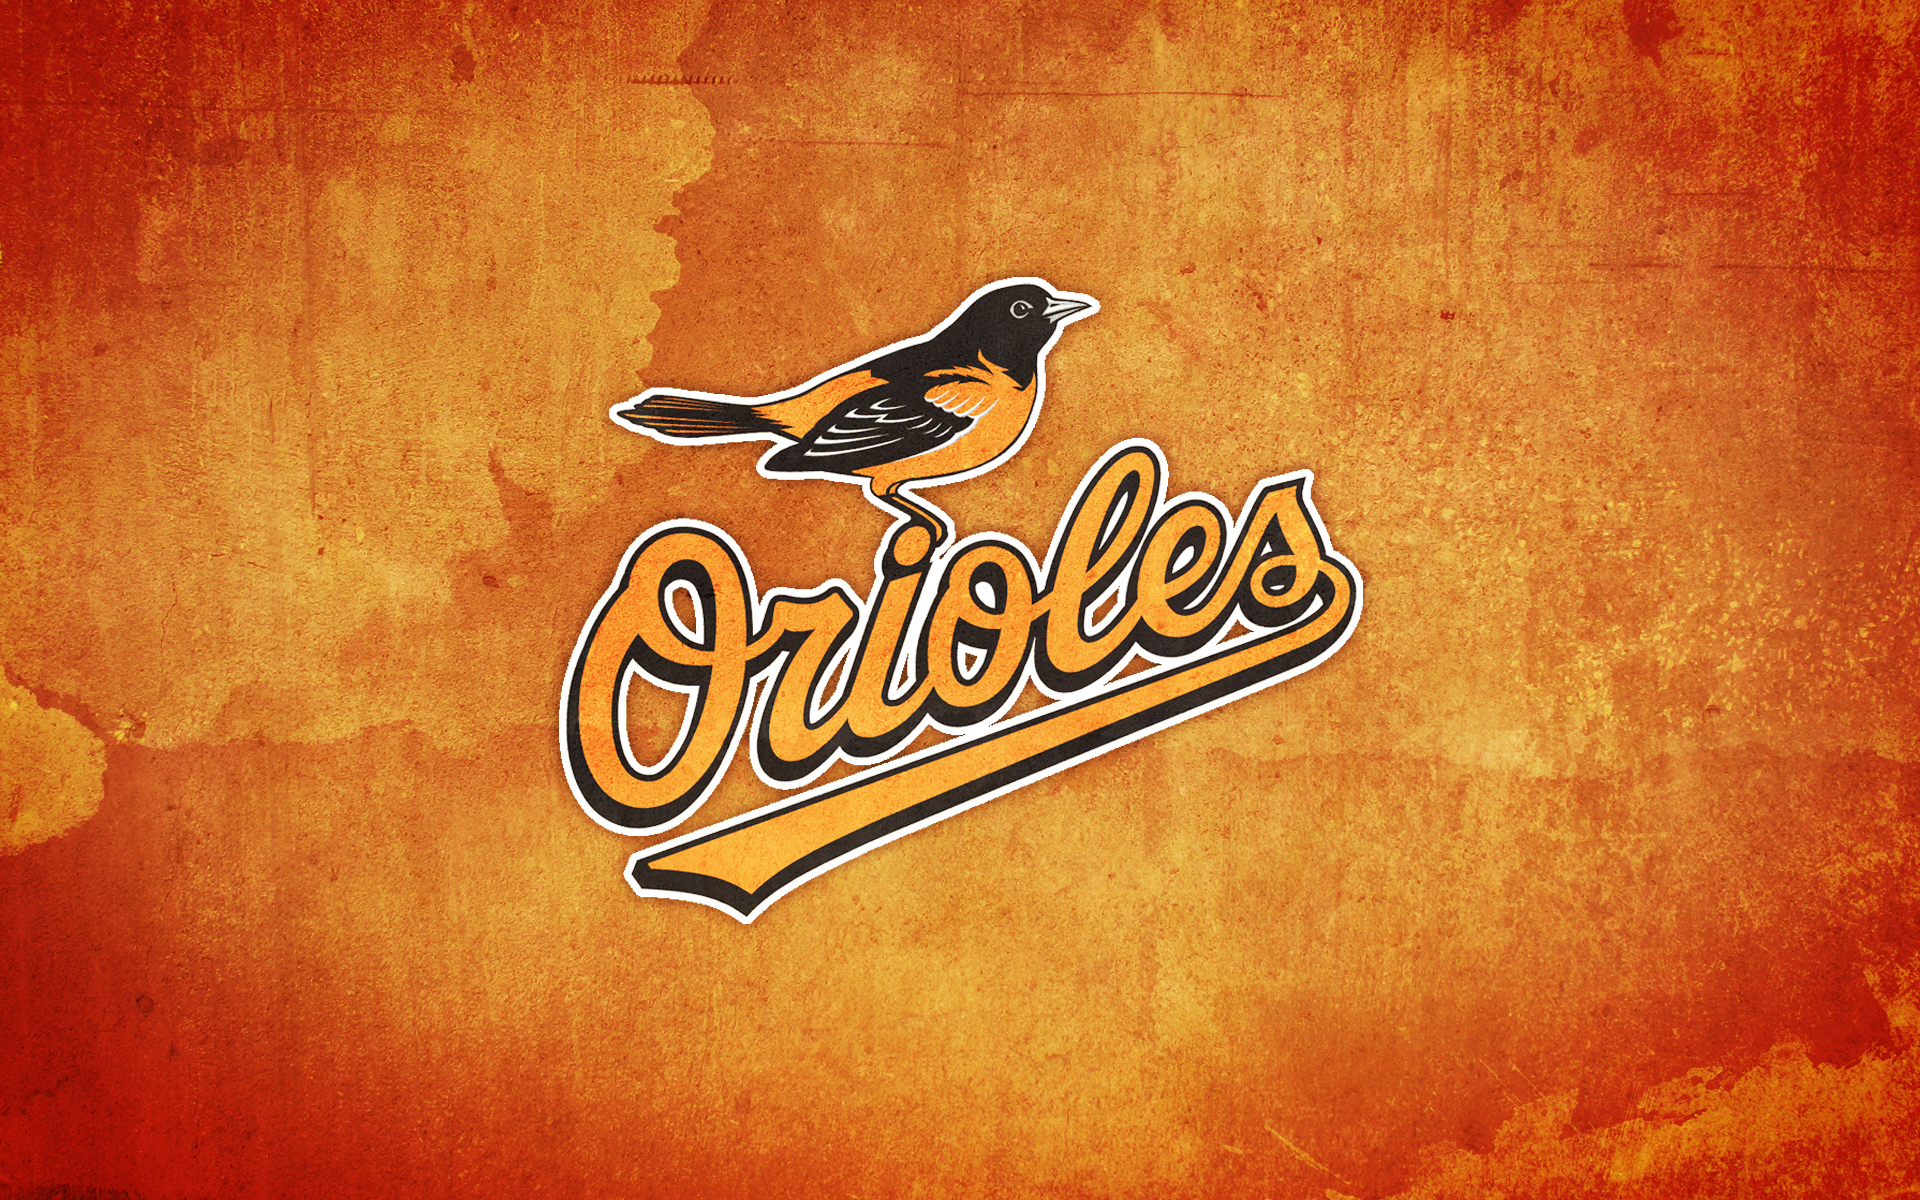 44+] Ravens and Orioles Wallpaper on WallpaperSafari  Orioles wallpaper,  Baltimore ravens football, Orioles